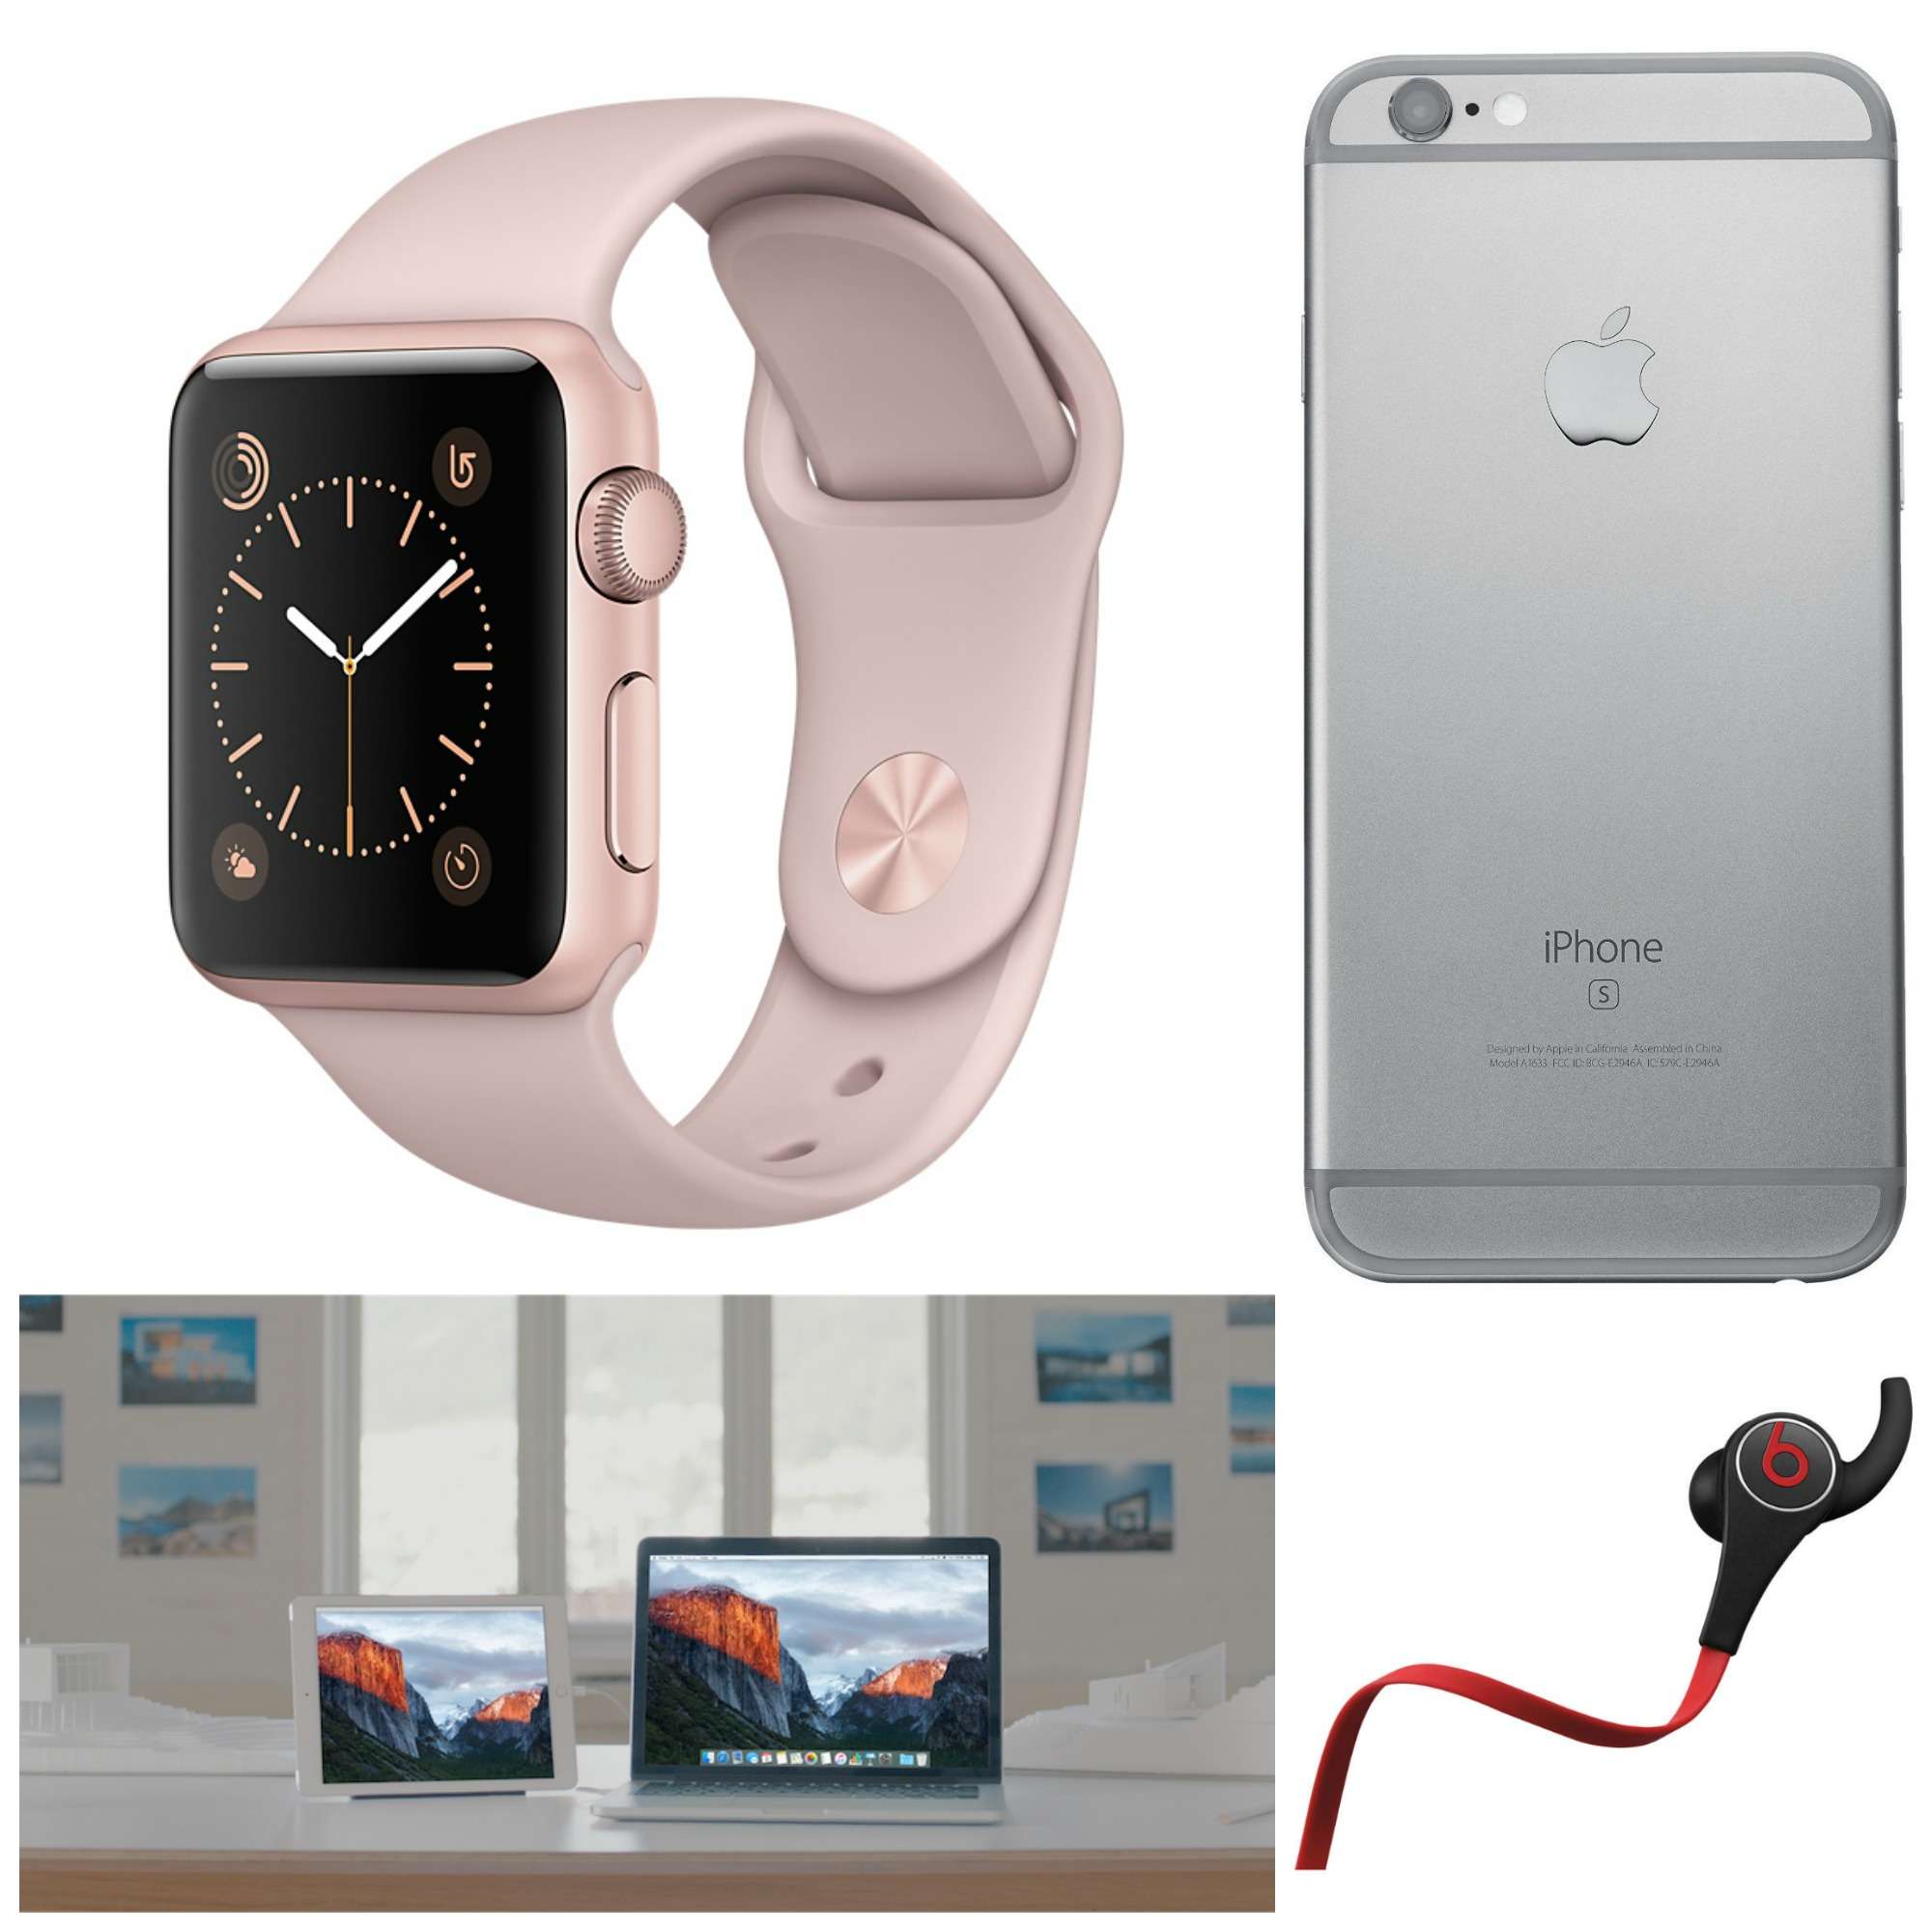 Get refurb deals on Apple gear or the amazing Duet Display at half price.